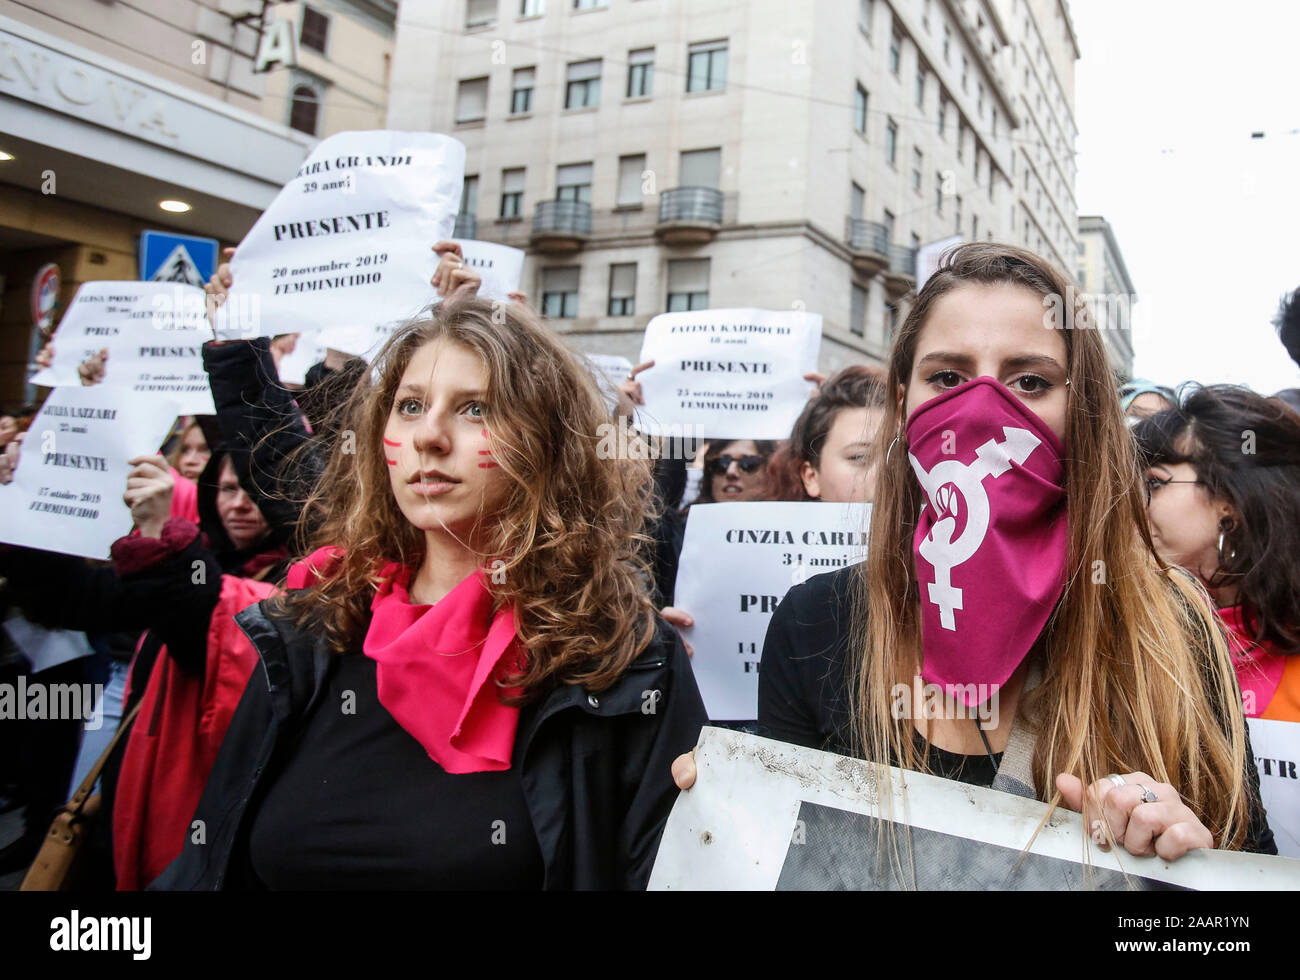 Rome, Italy, 23 Nov 2019. Protesters hold signs reading names and ages of femicide victims during the demonstration against male violence on women. Credit: Riccardo De Luca - Update Images/Alamy Live News Credit: Update Images/Alamy Live News Stock Photo